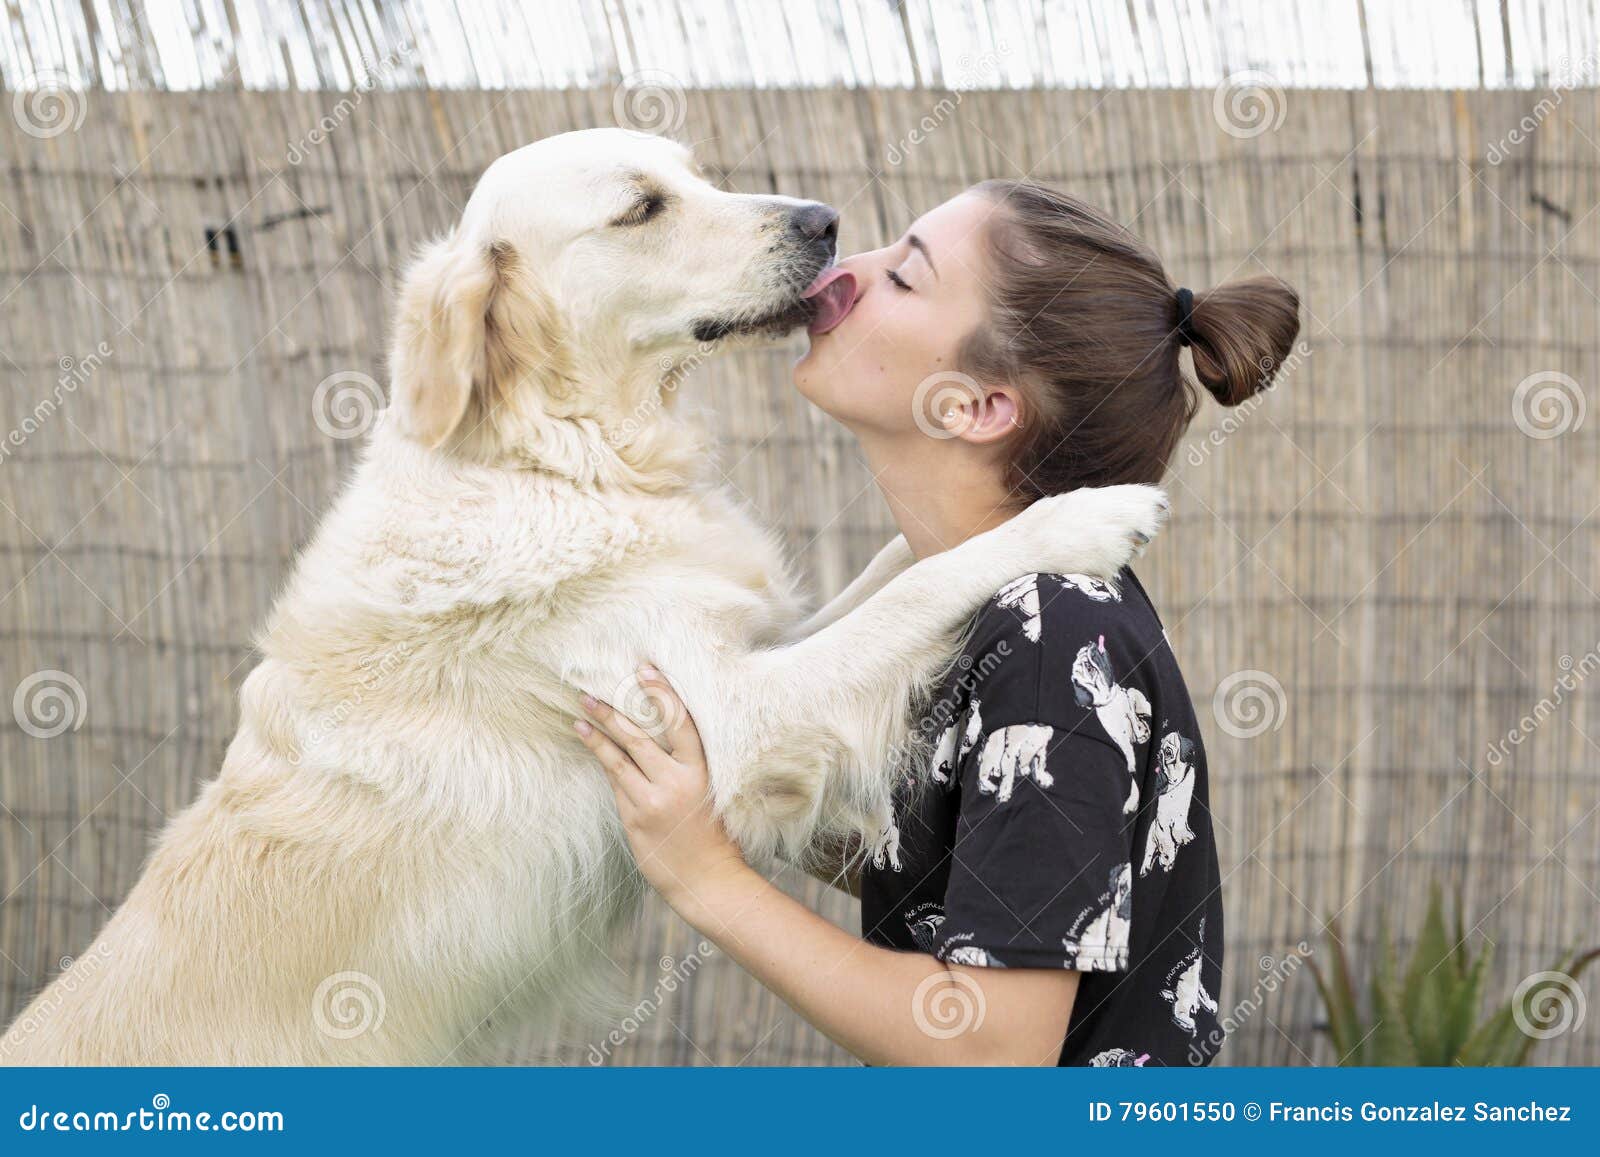 Dog Breed Golden Retriever Giving A Hug To His Owner Stock Photo Image Of Natural Outdoors 79601550